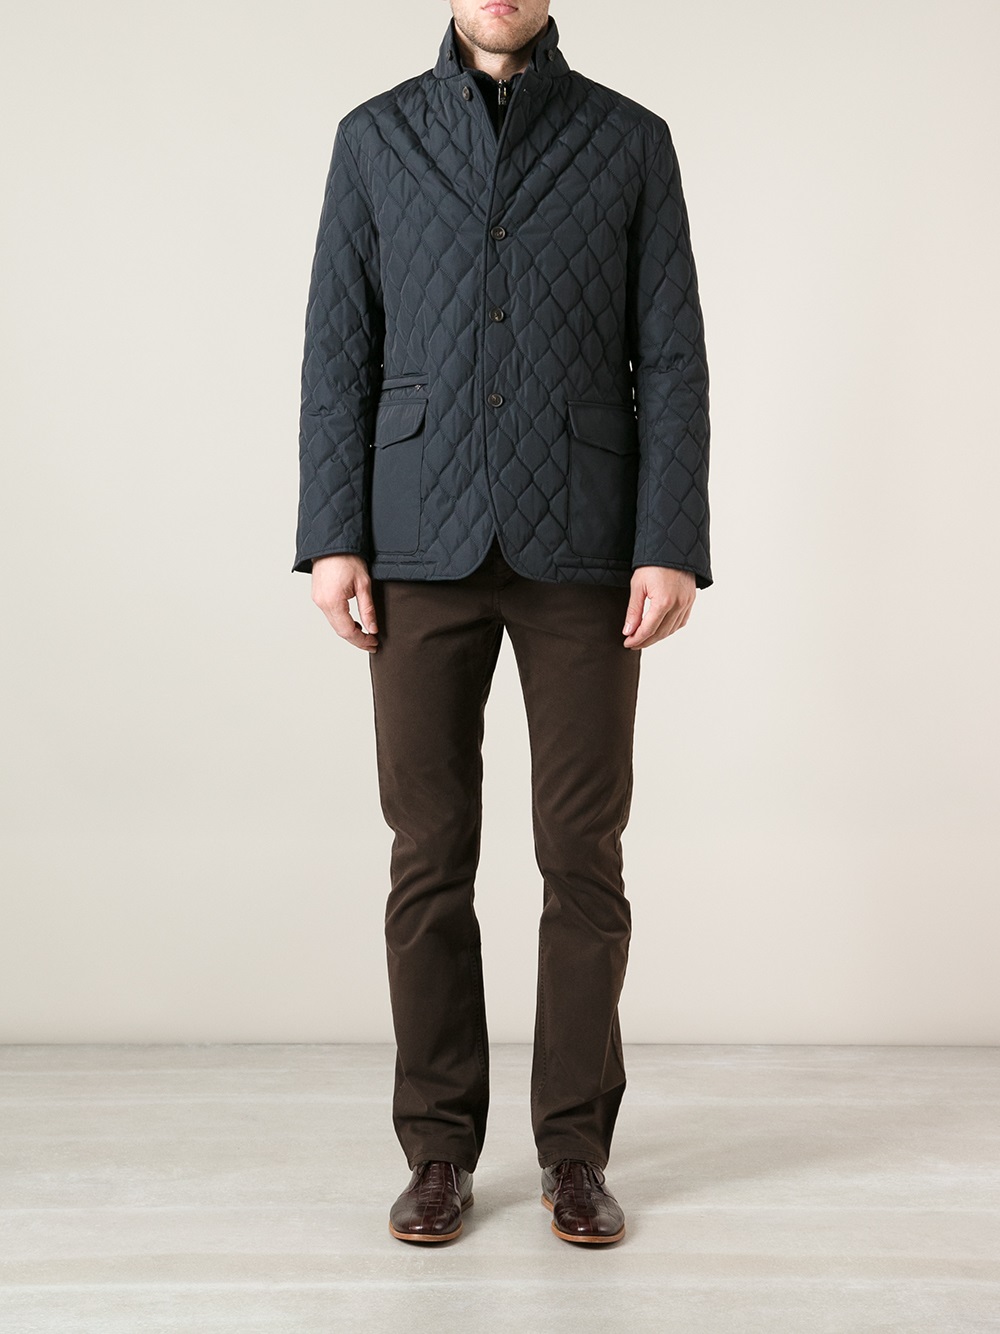 Corneliani Quilted Jacket in Blue for Men - Lyst